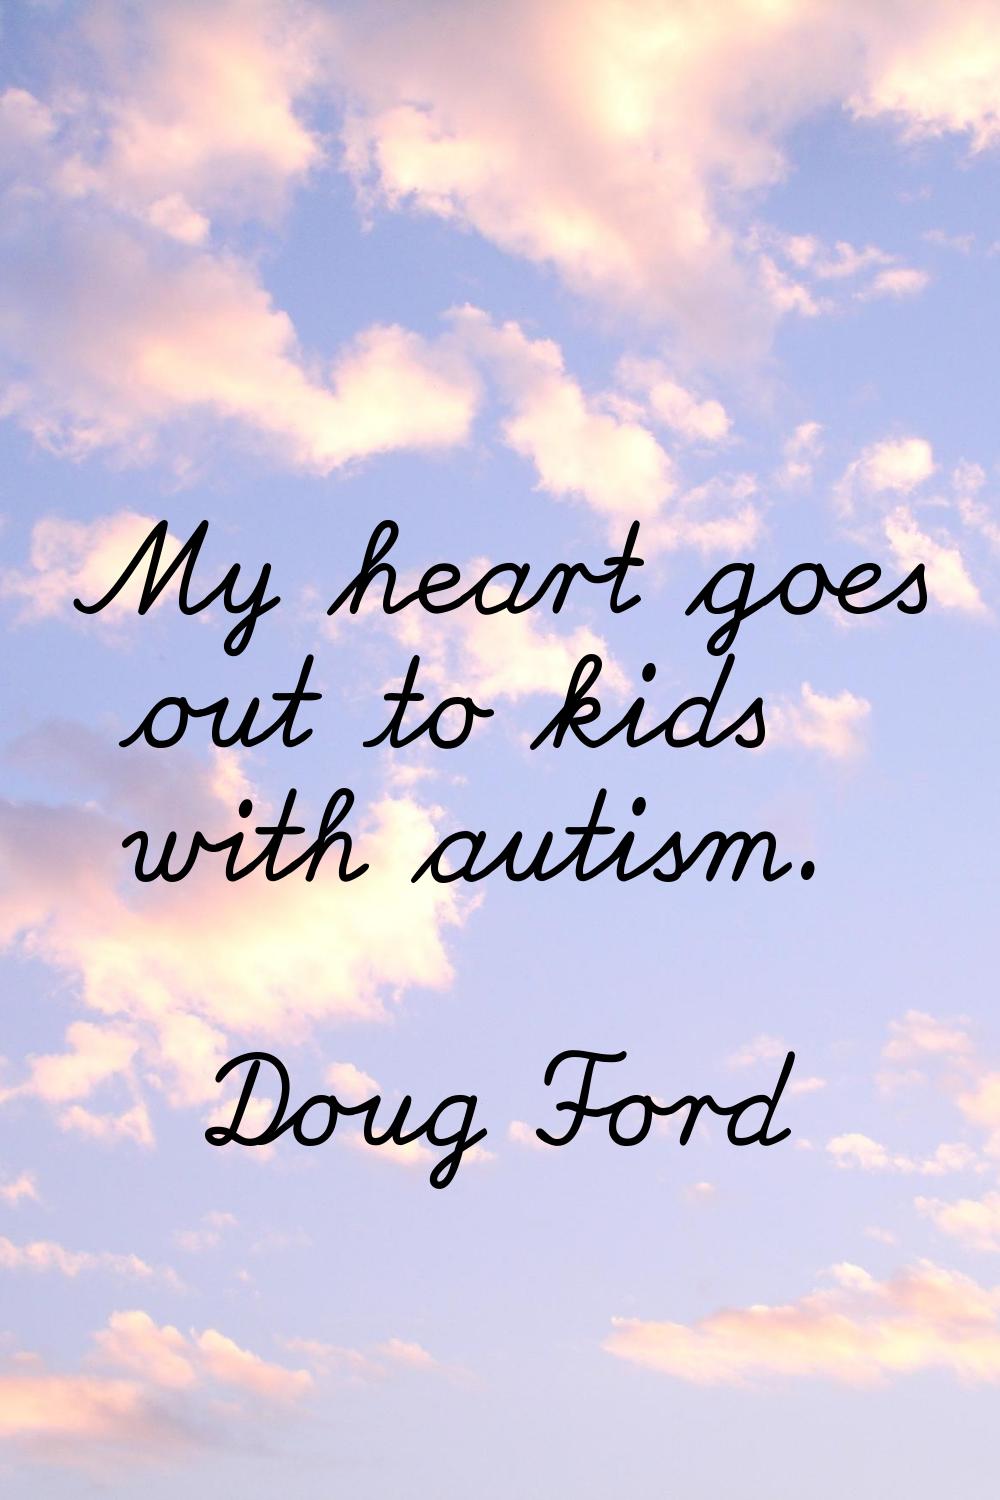 My heart goes out to kids with autism.